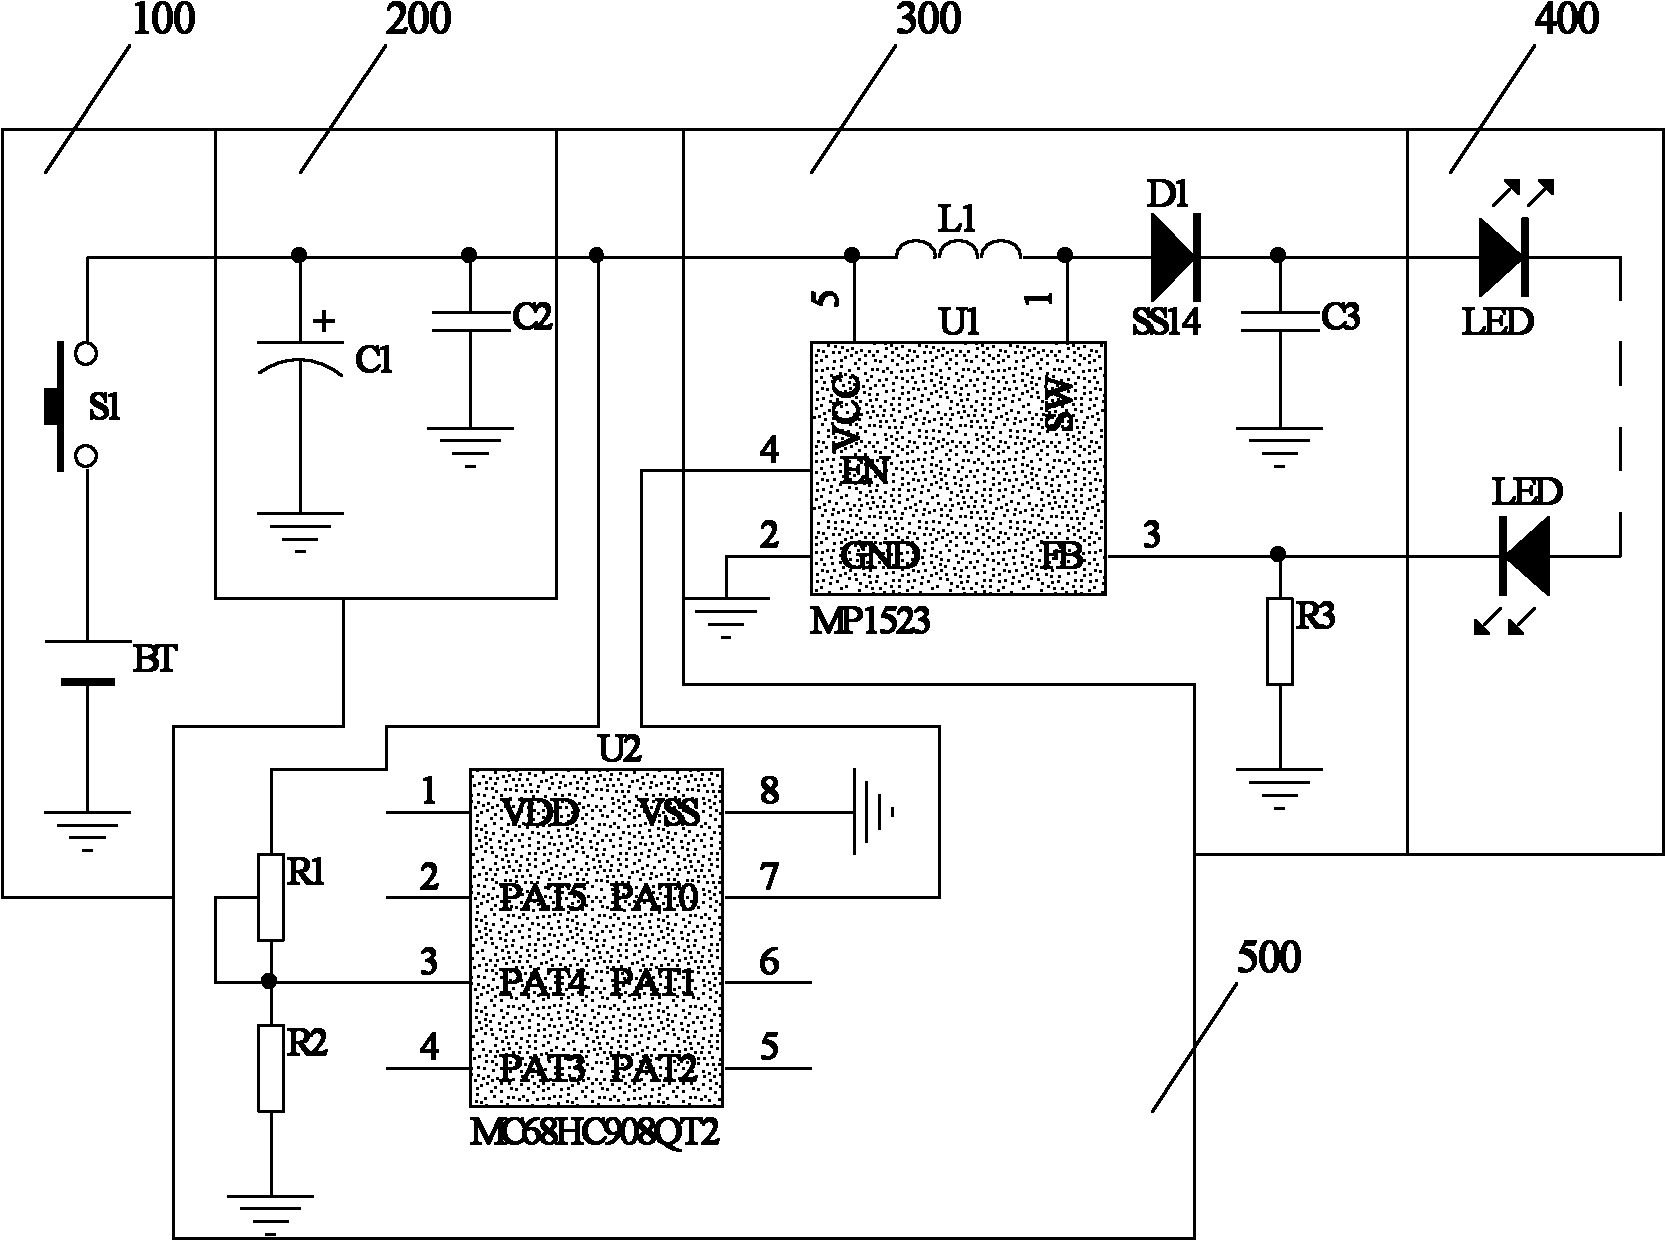 LED (Light Emitting Diode) constant-current drive circuit and LED lamp using same